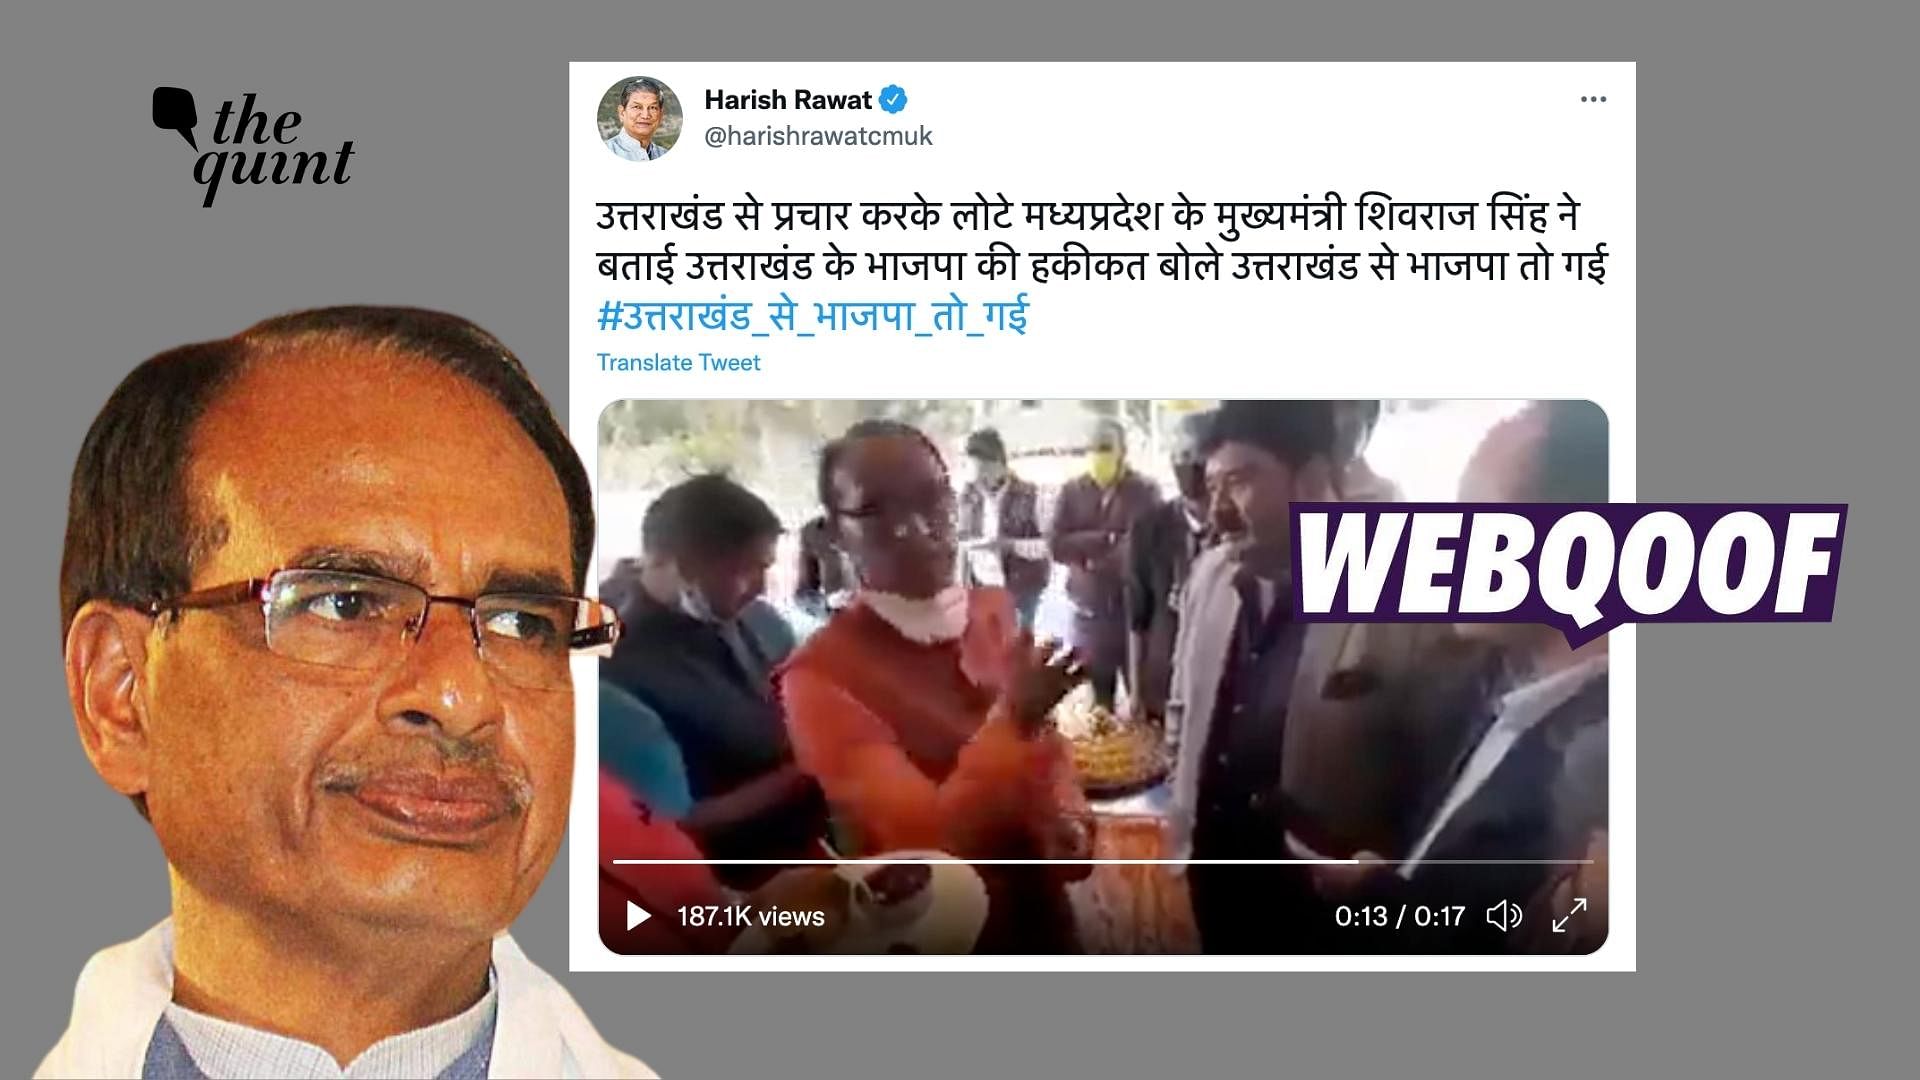 <div class="paragraphs"><p>The claim states that the&nbsp;Madhya Pradesh Chief Minister Shivraj Singh Chouhan had said that 'BJP will be voted out of Uttarakhand'.</p></div>